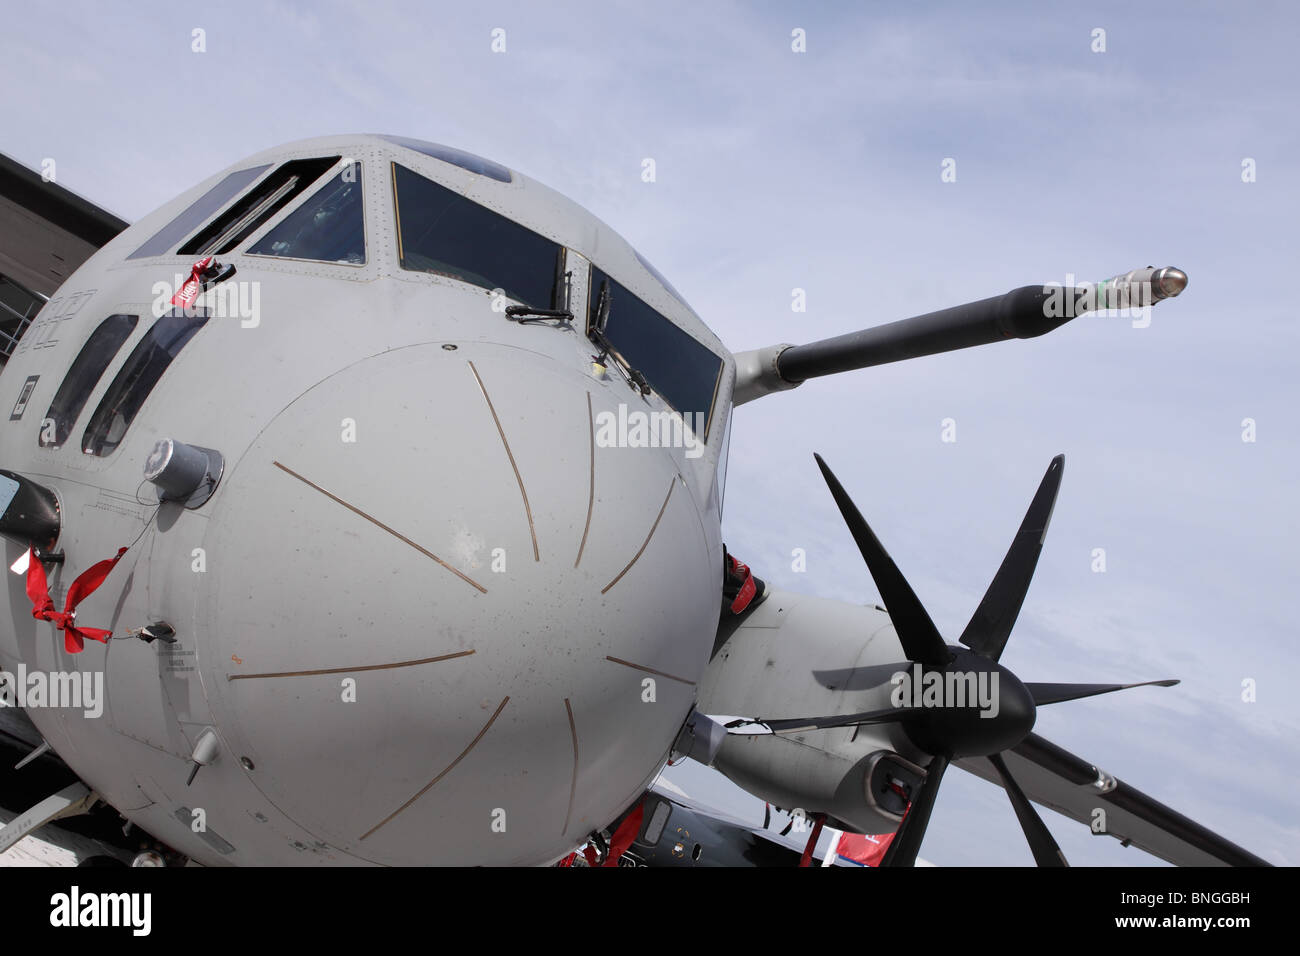 Alenia C-27J Spartan transport aircraft with air refueling probe above the cockpit Alenia are part of the Finmeccanica group Stock Photo